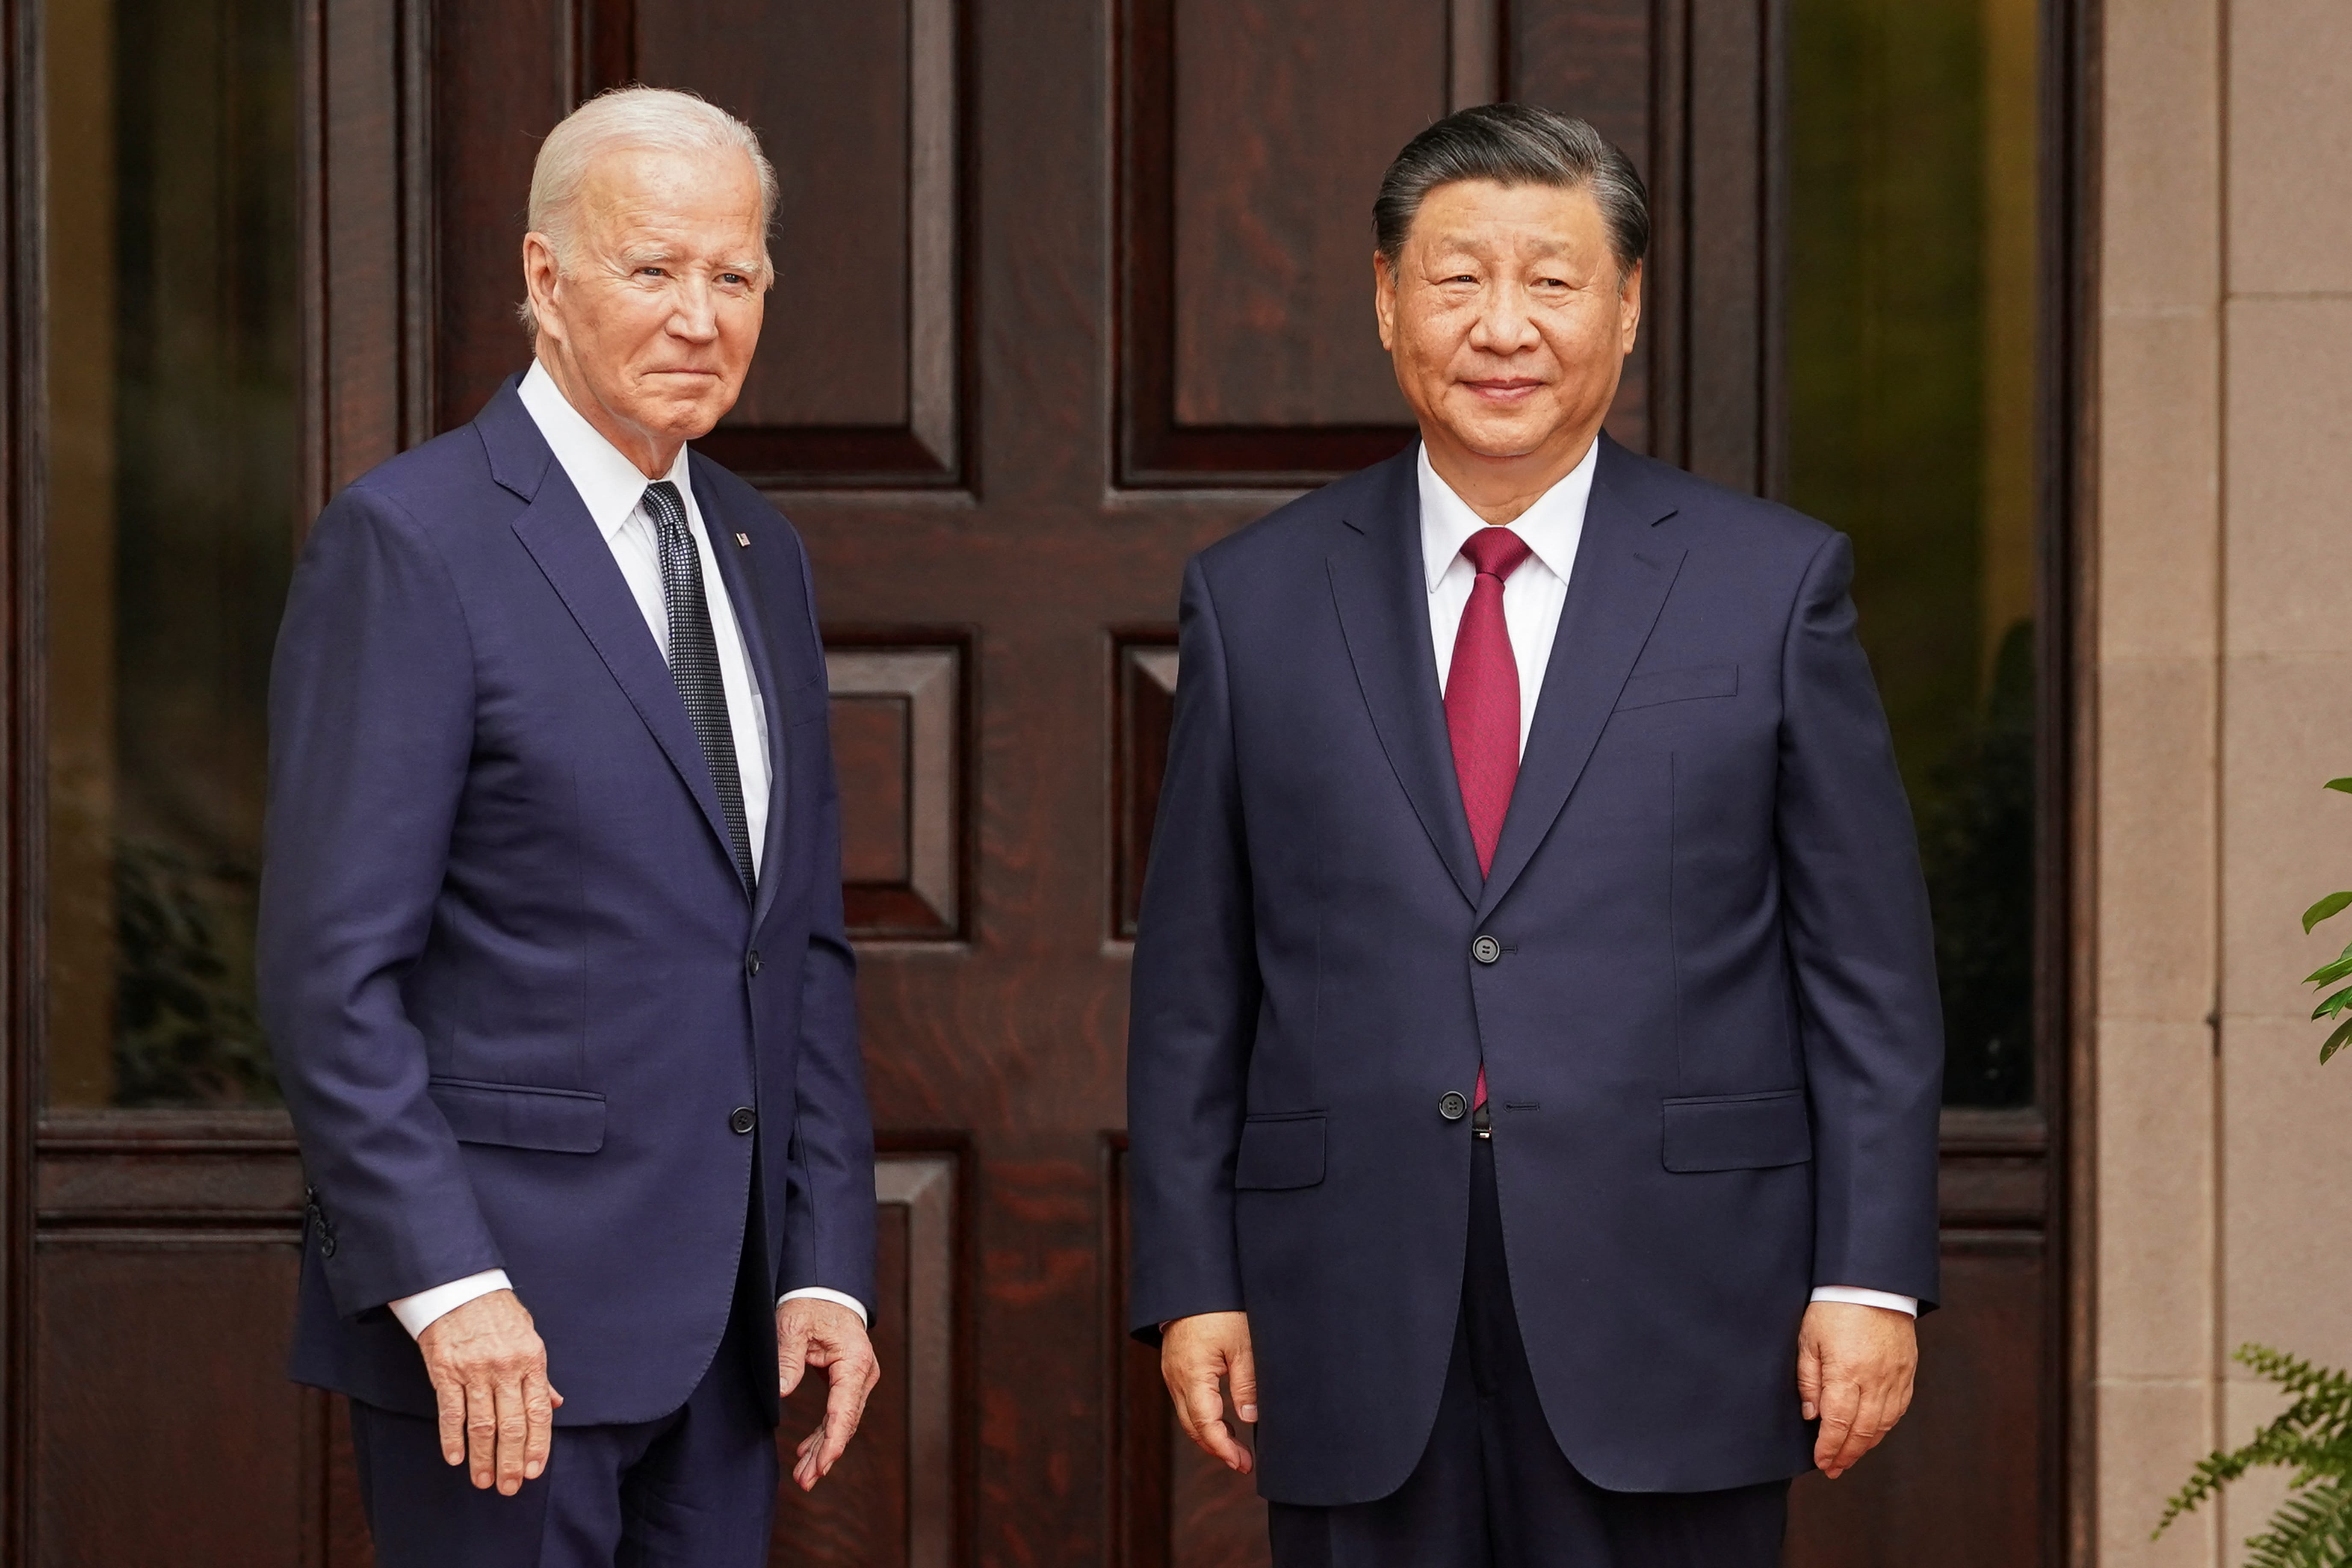 President Biden Labels Xi Jinping a 'Dictator' Post-Summit, Straining US-China Relations